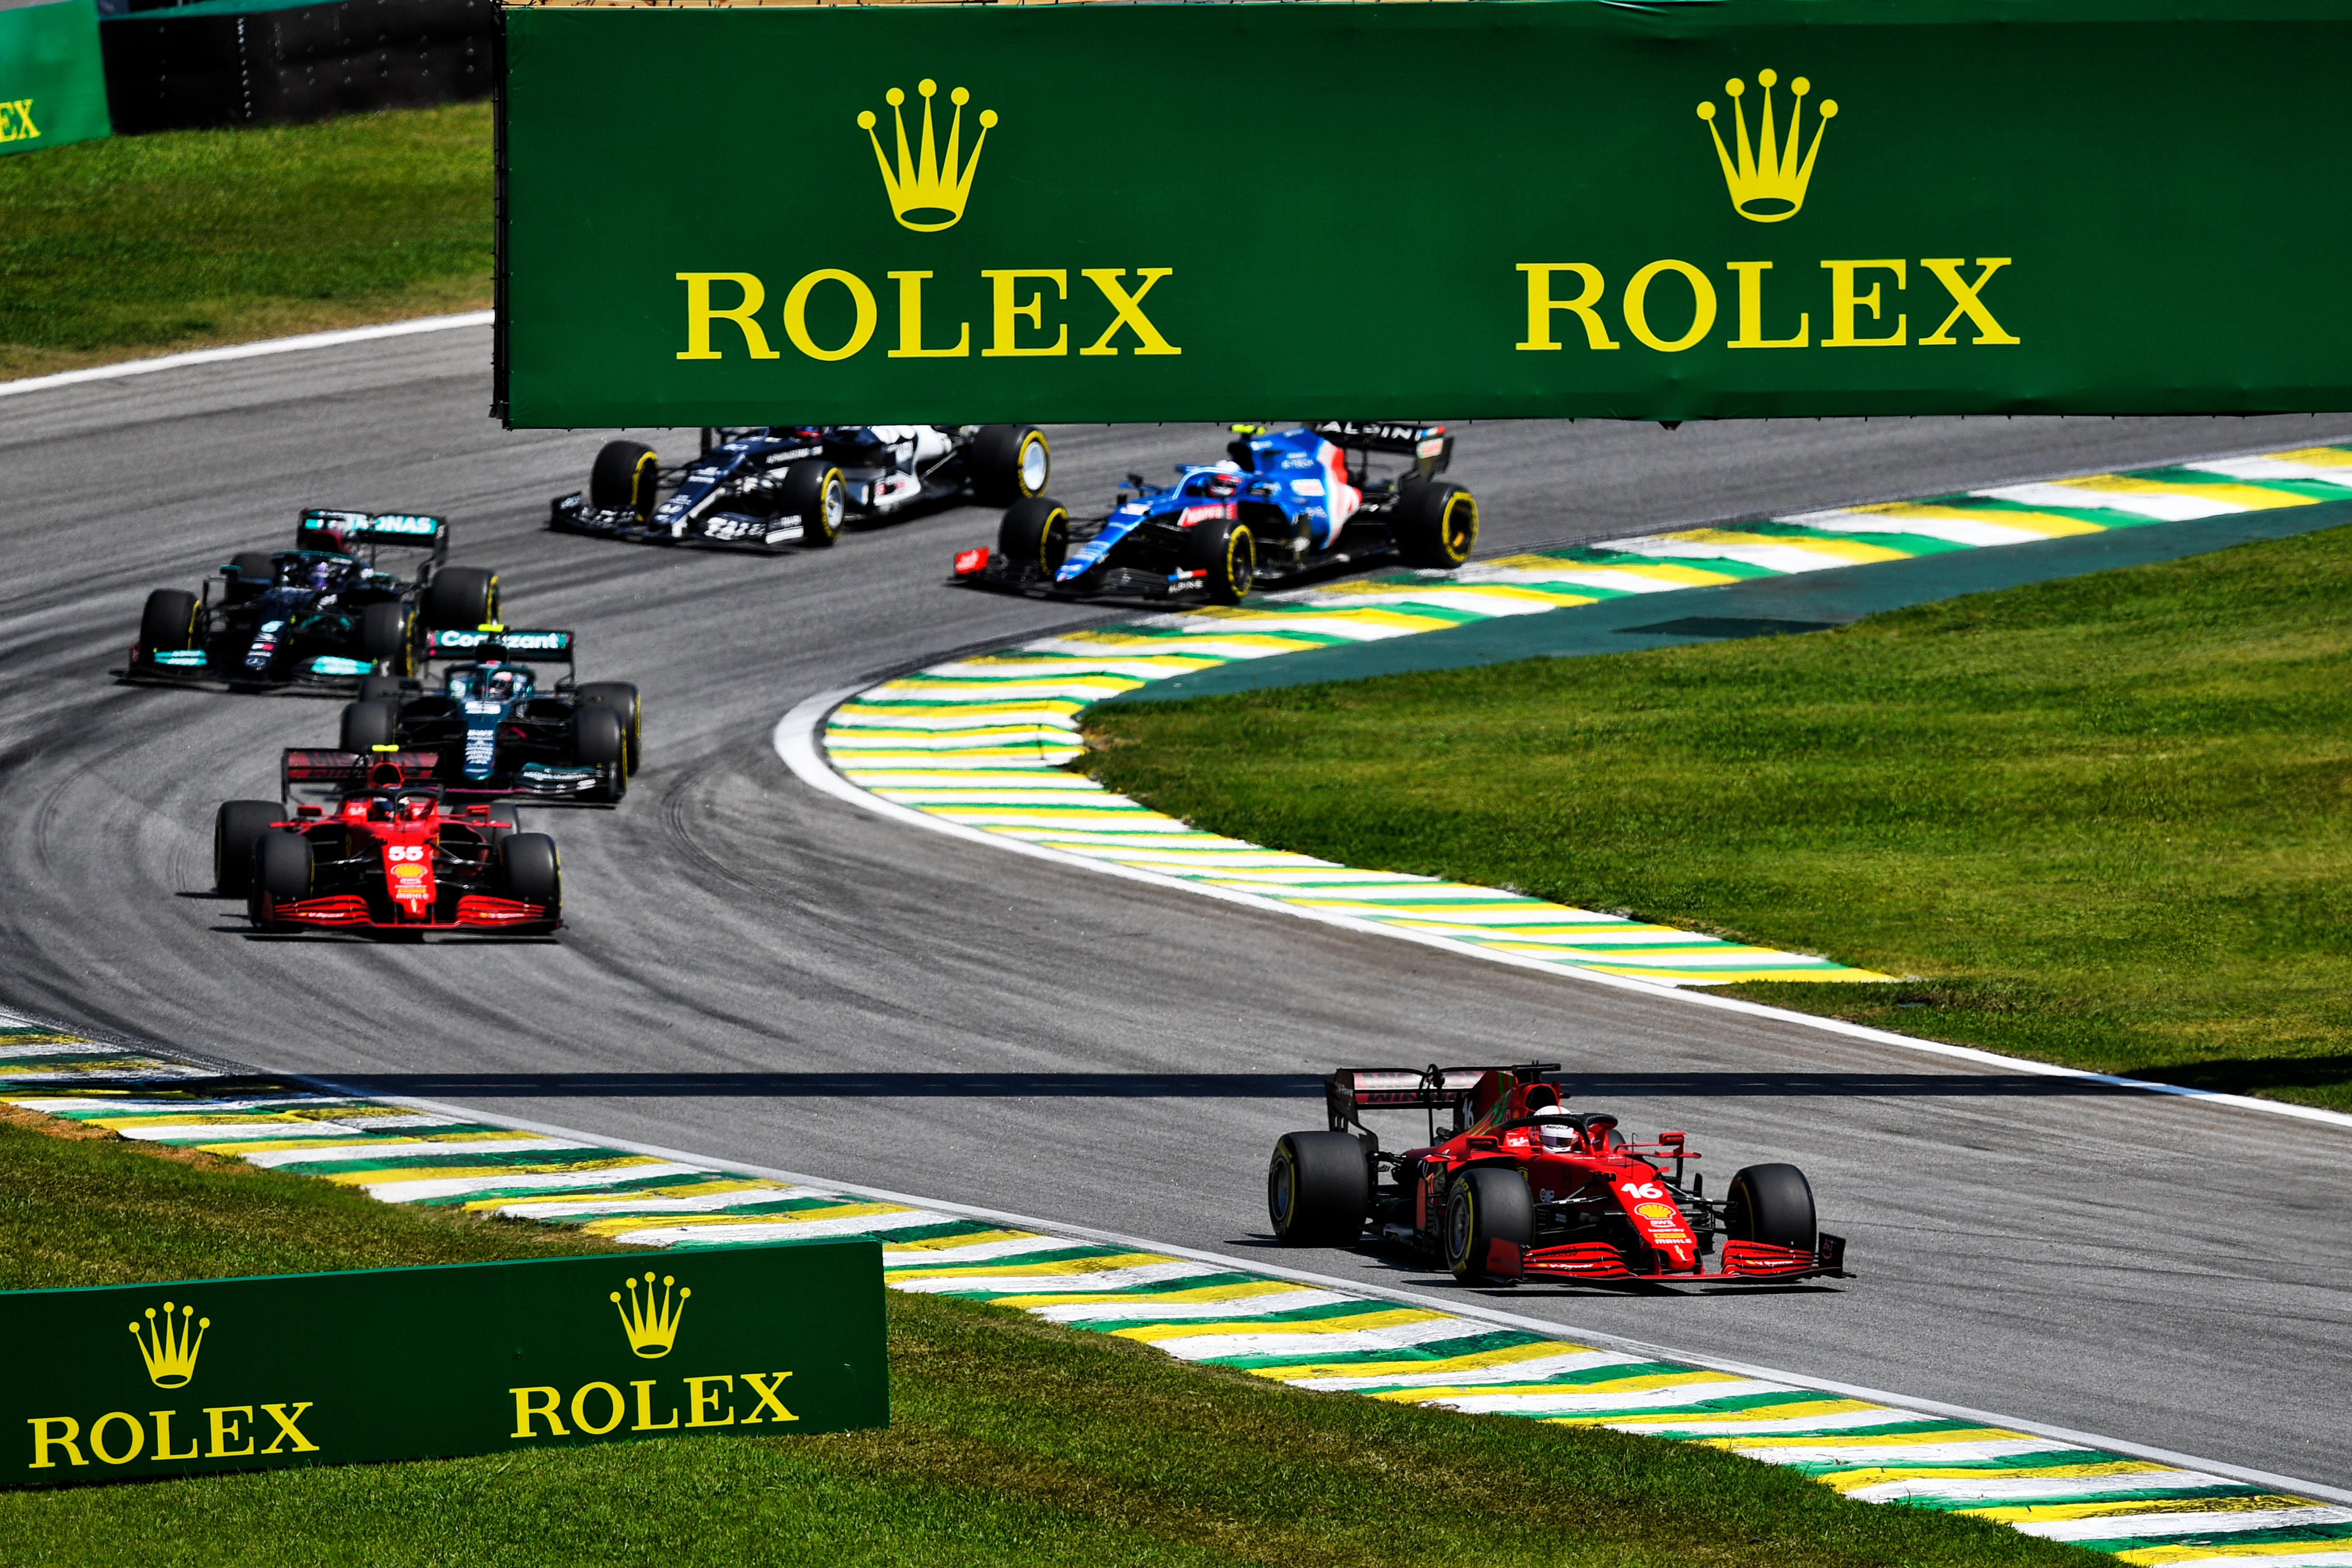 motorola on X: Vamos Brasil, we're in for some speedy racing at  Interlagos! 💨 What are your podium predictions for the #BrazilGP? 🏆 #F1  #Formula1 #motorolaF1  / X